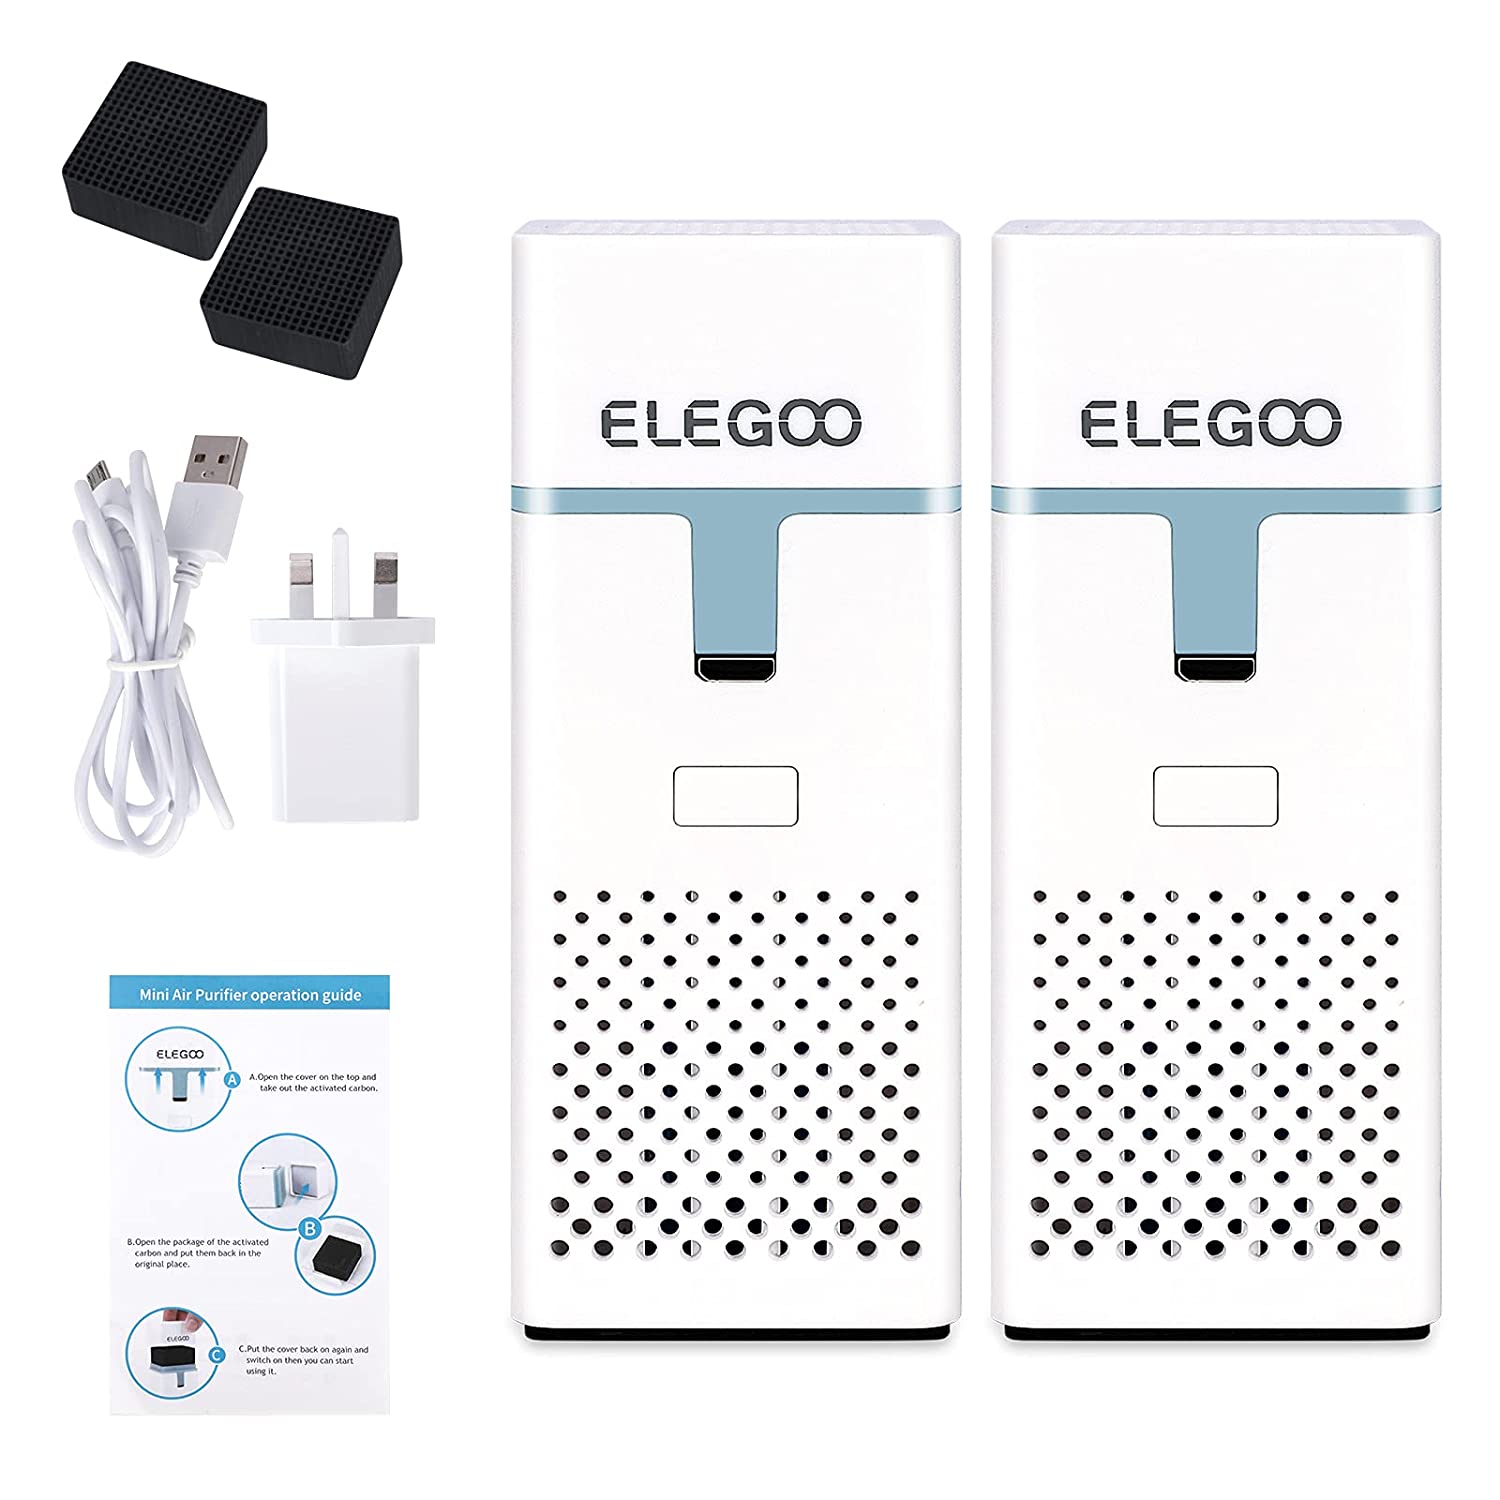 ELEGOO Mini Air Purifier with Activated Carbon Filter and Universal Adaptor for LCD DLP MSLA Resin 3D Printer (Pack of 2)